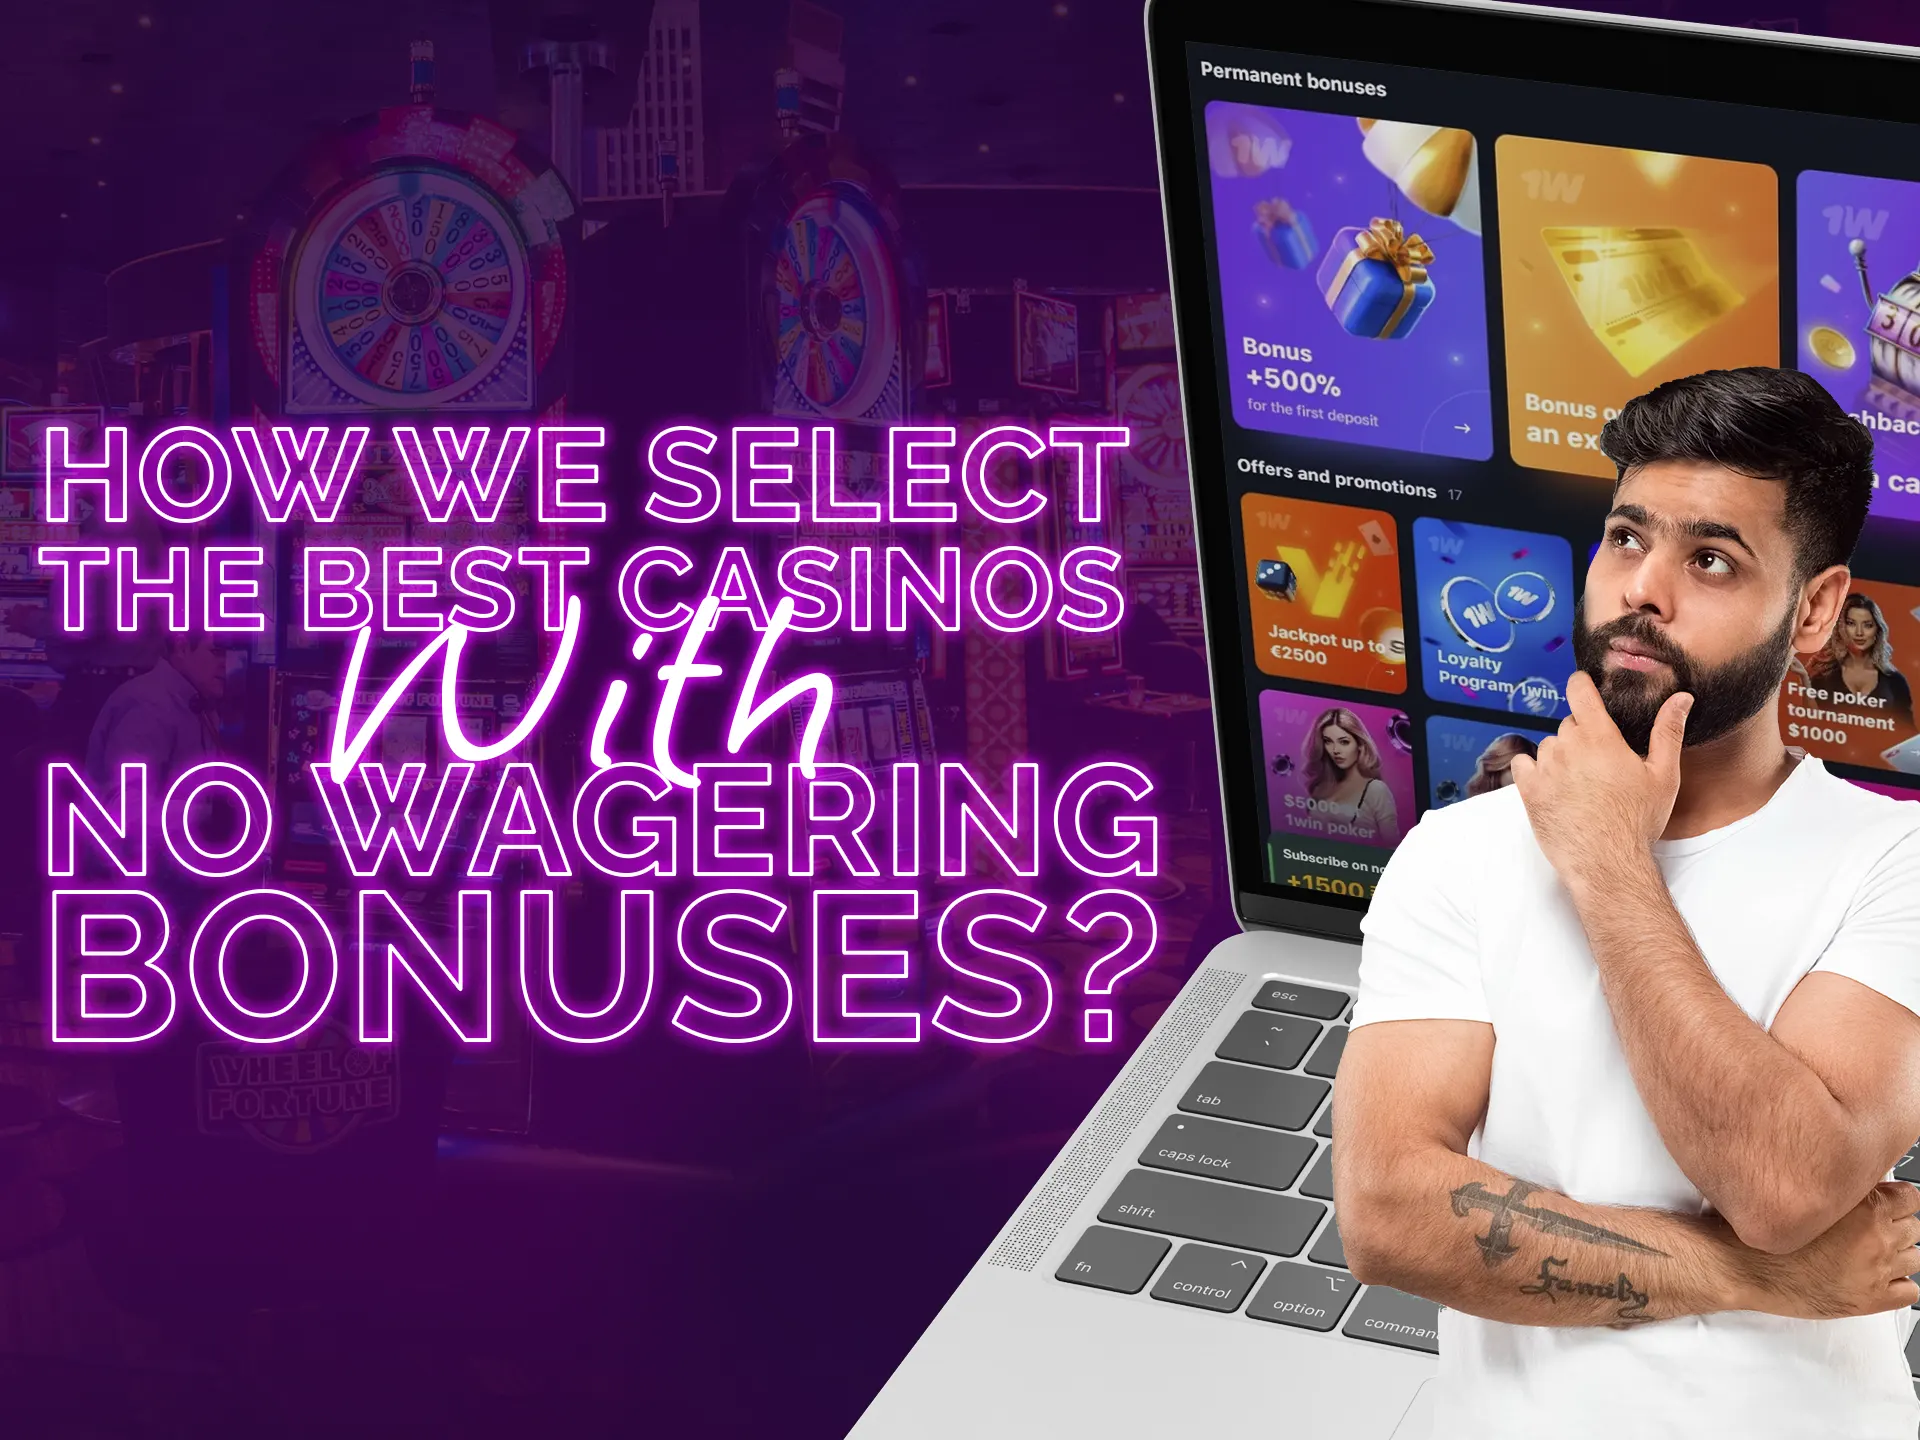 The ways and criteria how we selecting best casinos with no-wagering bonuses.